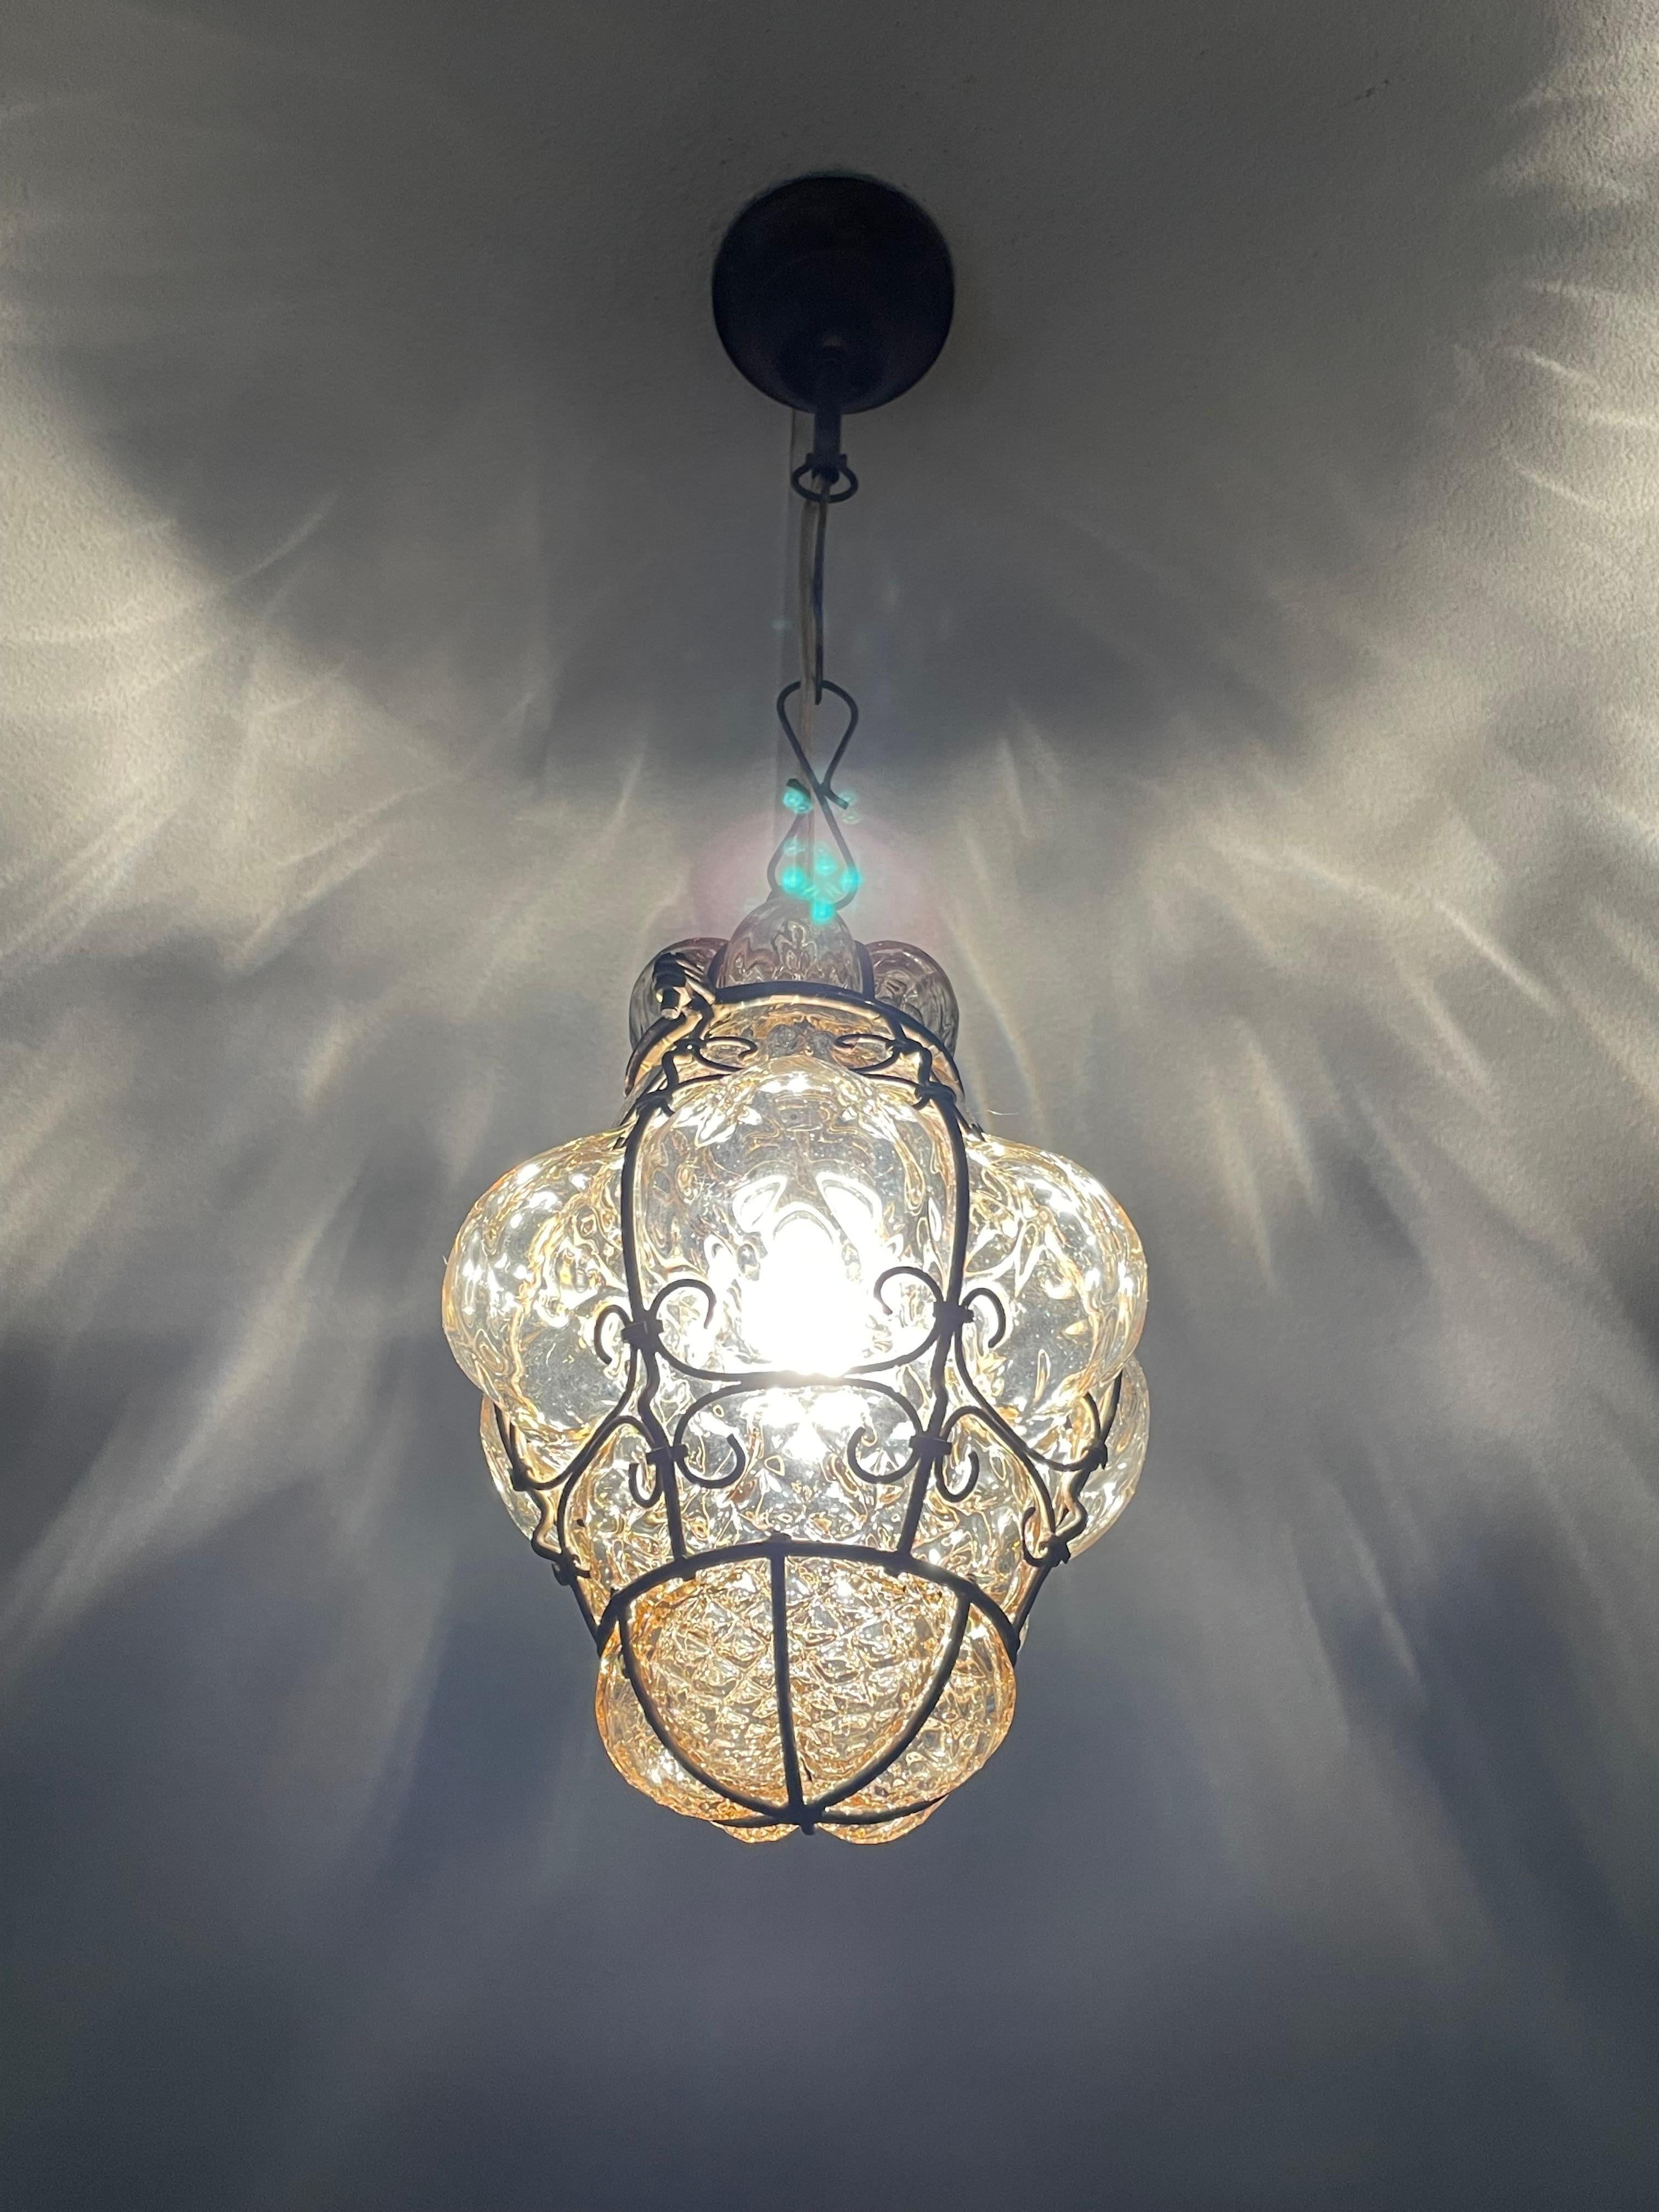 One of the smallest ever, Venetian mouth blown glass pendants.

This adorable and antique Venetian pendant light is one of the smallest of its kind that we ever had the pleasure of offering. When it comes to condition, style and true workmanship